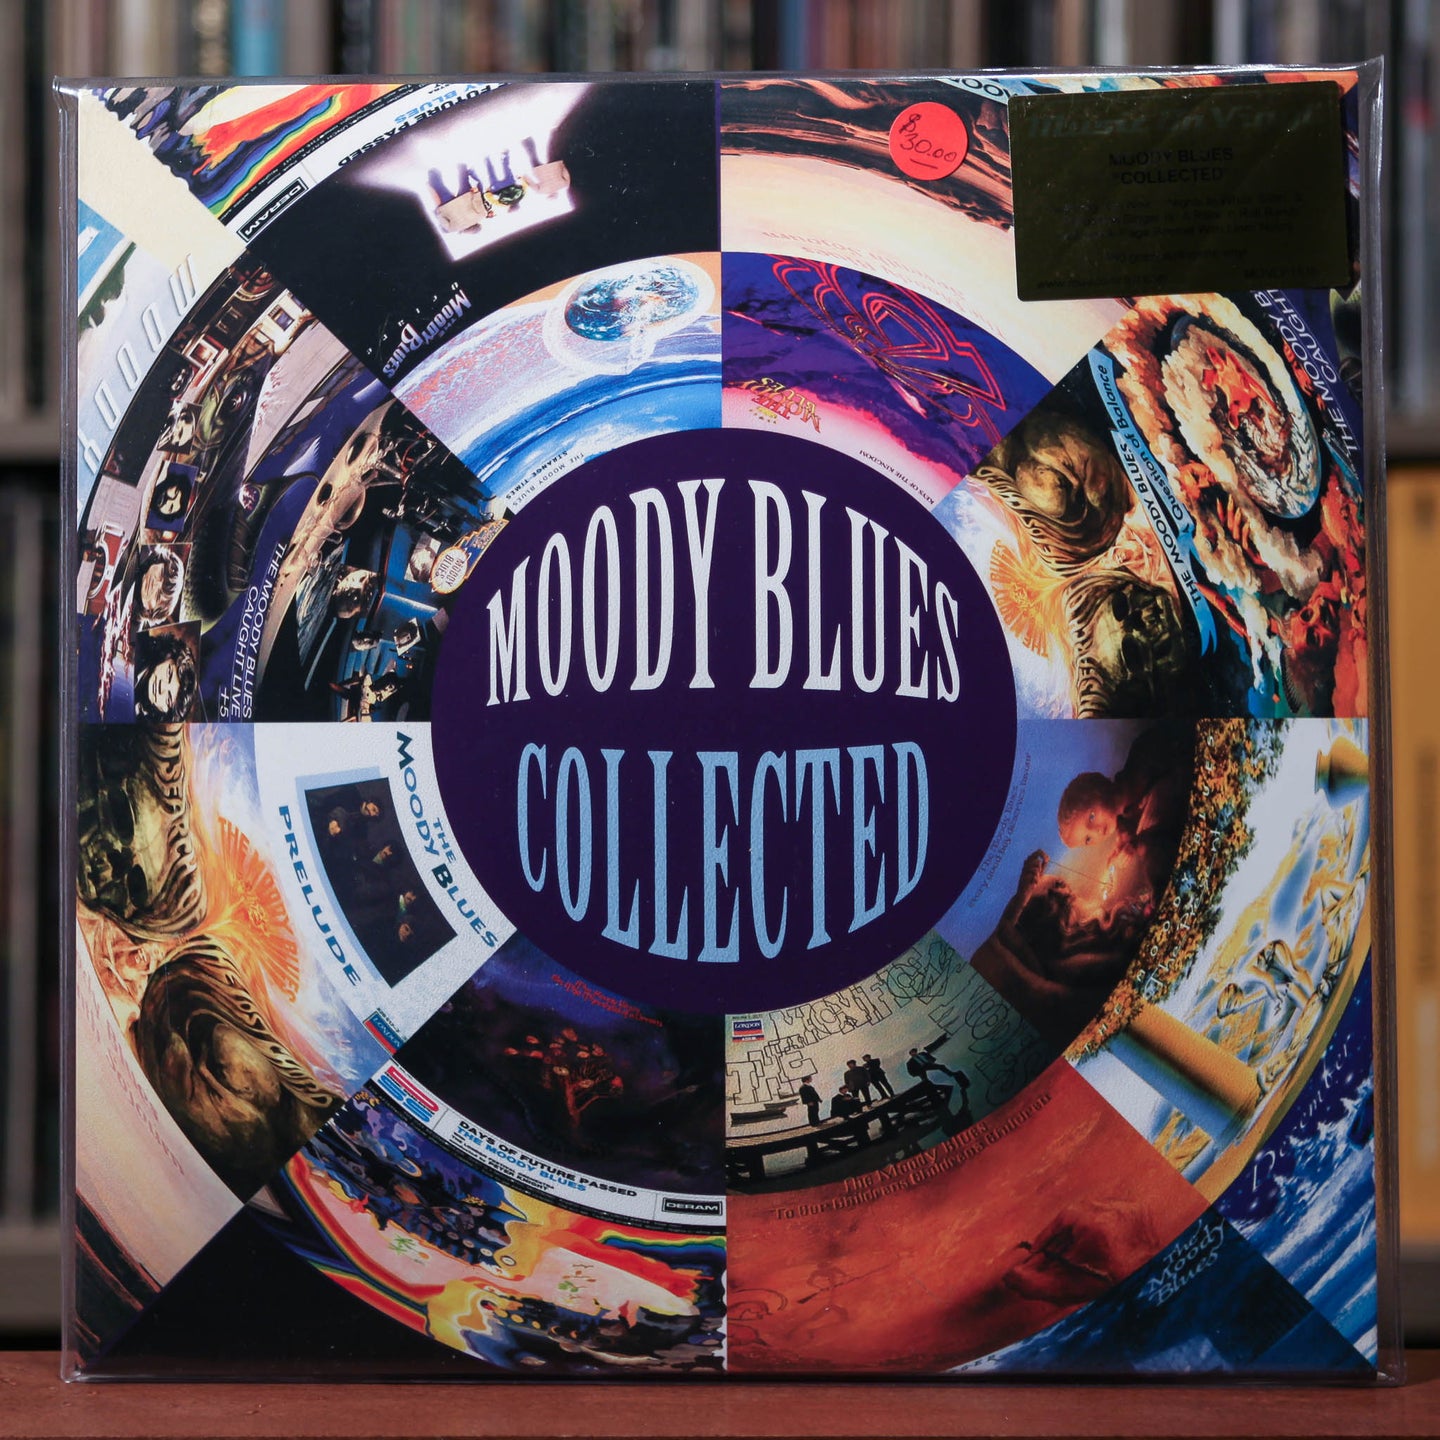 The Moody Blues - Collected - 2LP - 2017 Music On Vinyl, SEALED